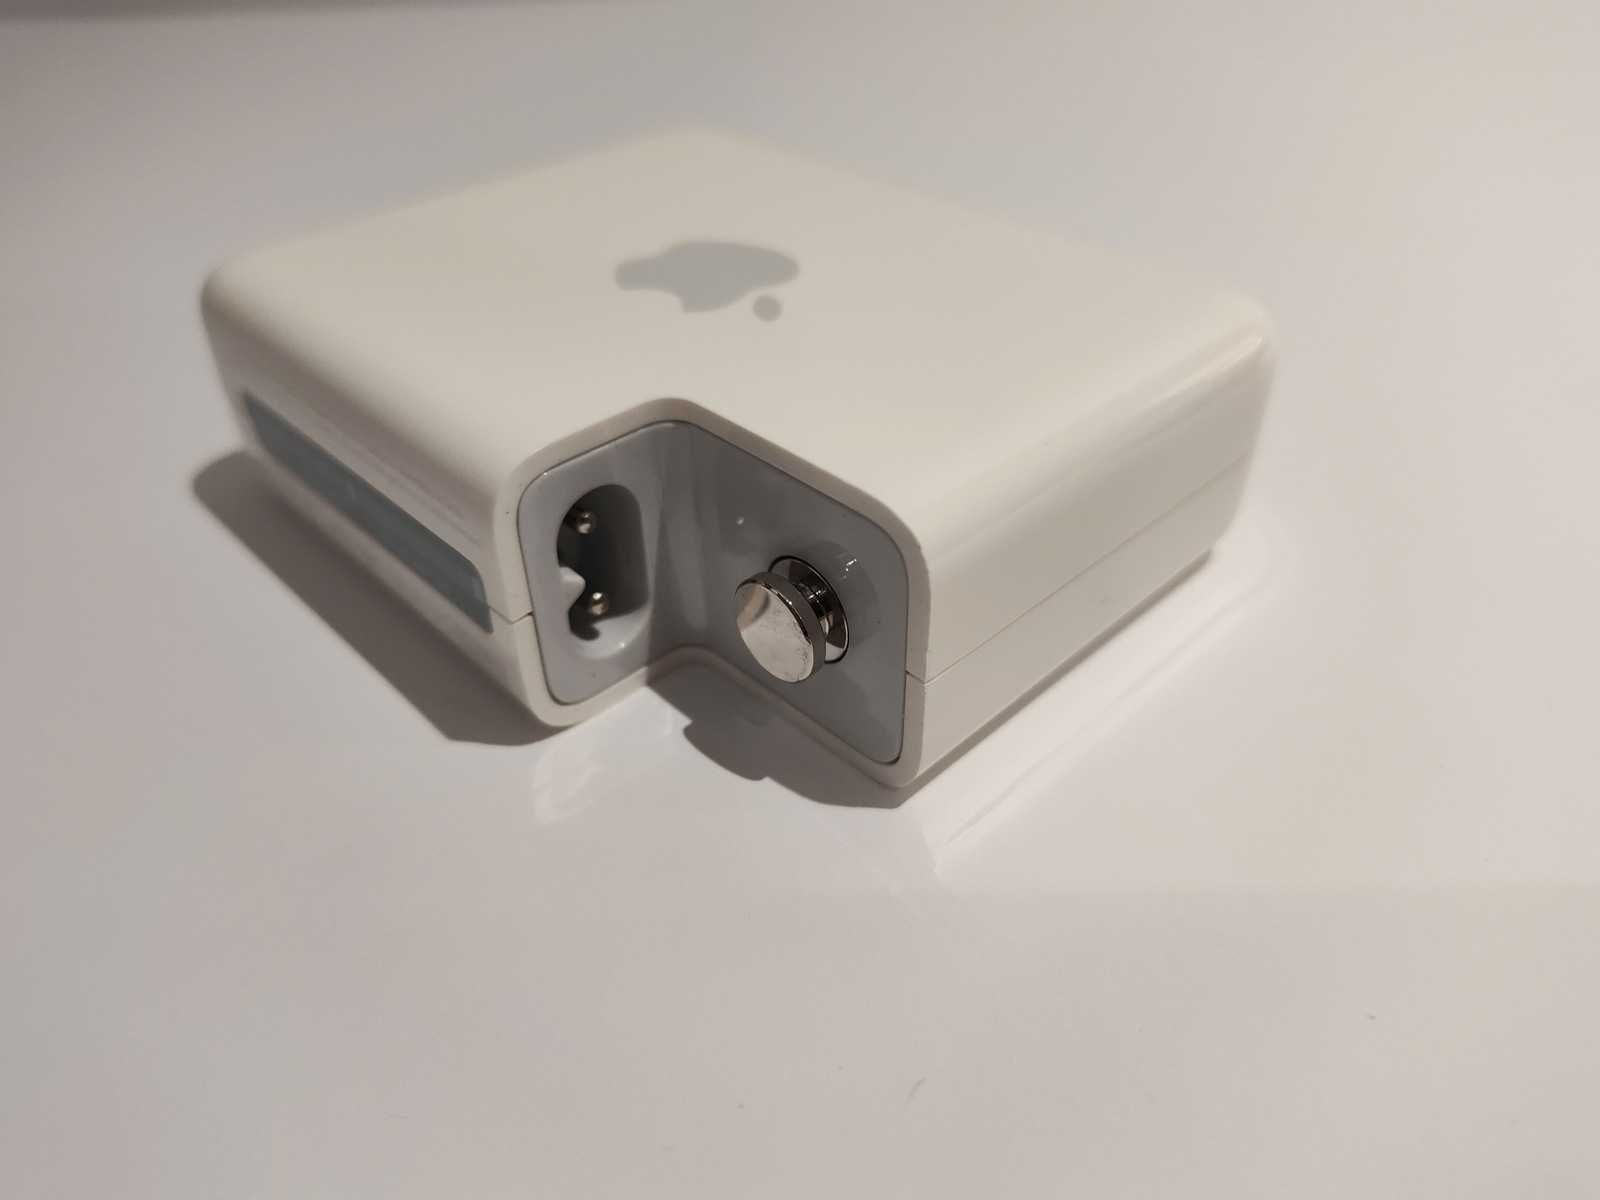 Apple AirPort Express A1264 Access Point Base station